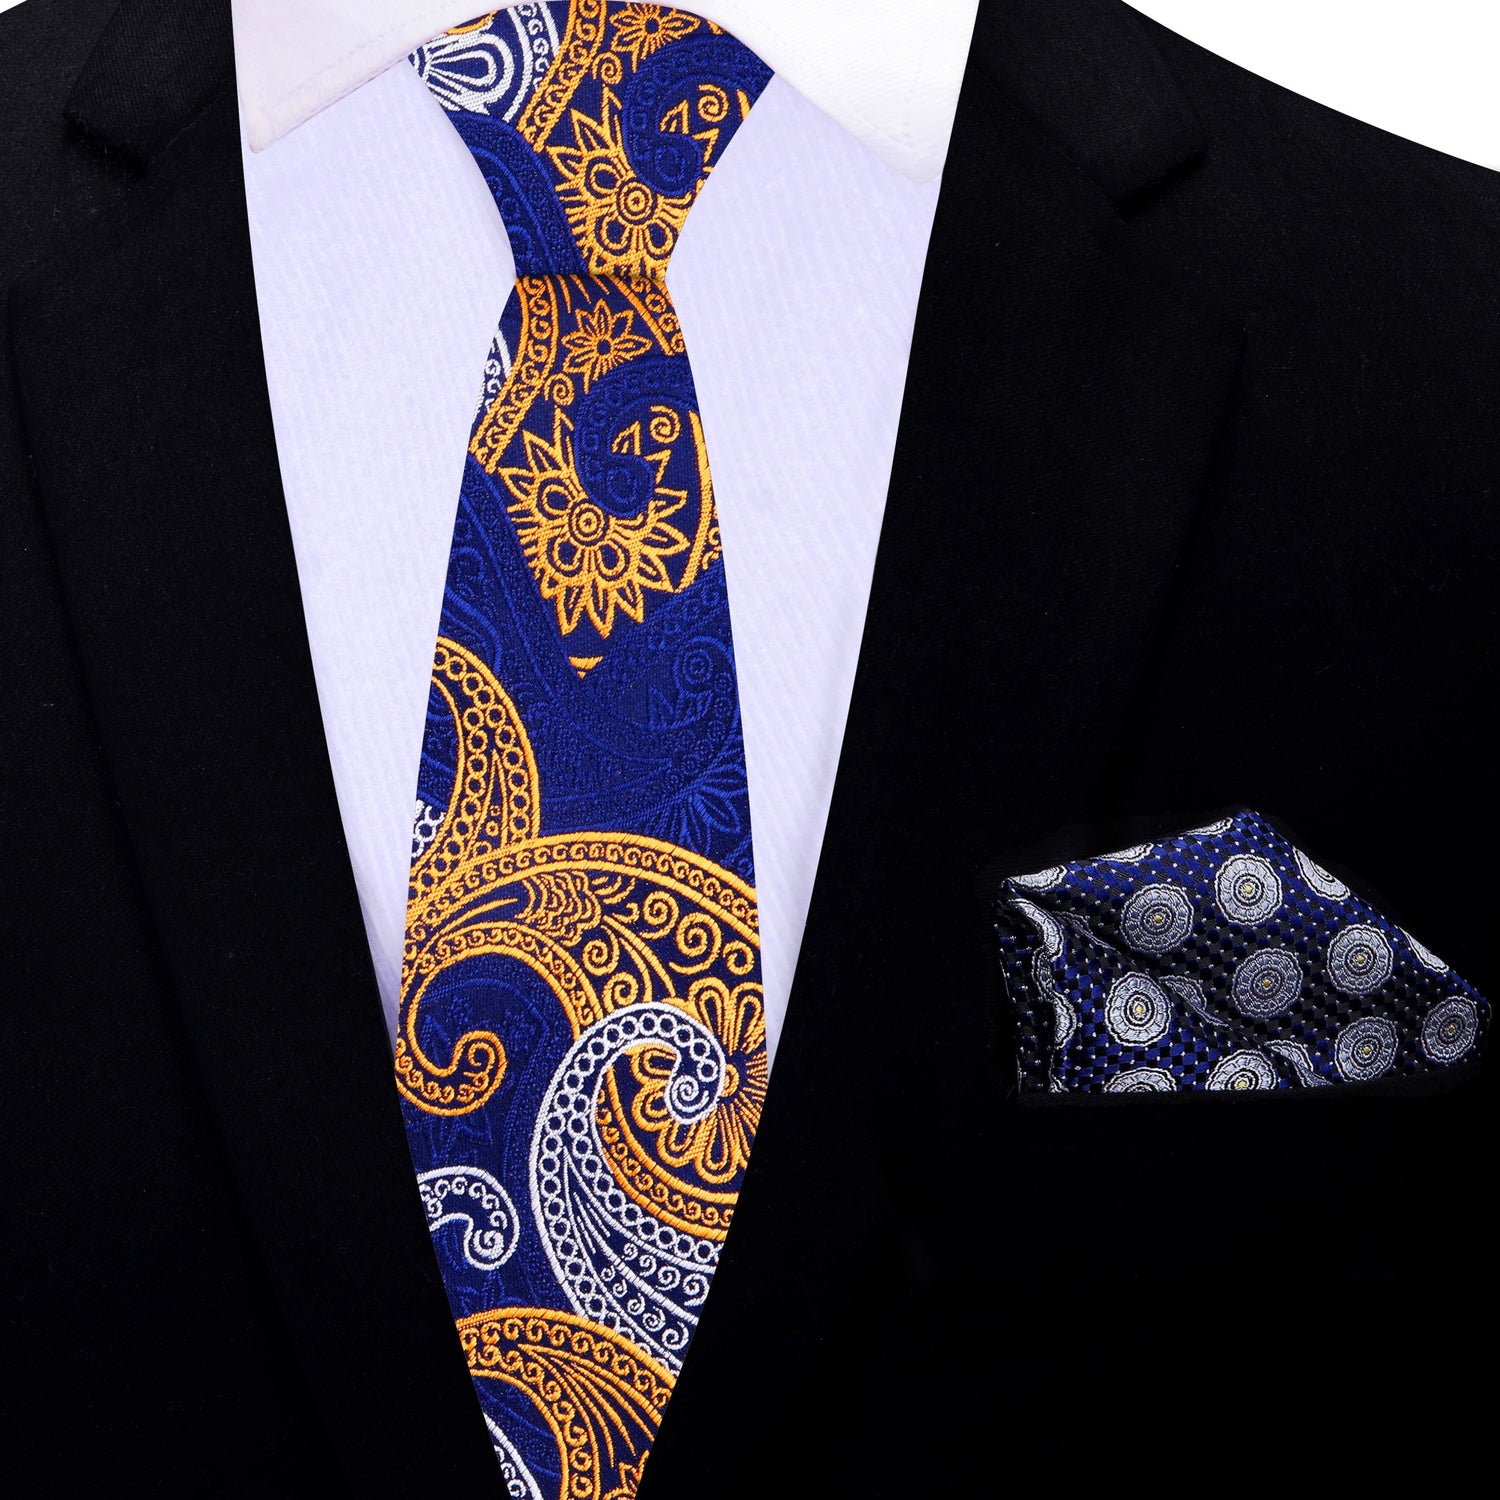 Thin Tie: Blue, Yellow Gold, White Paisley Tie and Accenting Blue Grey Yellow Geometric Square